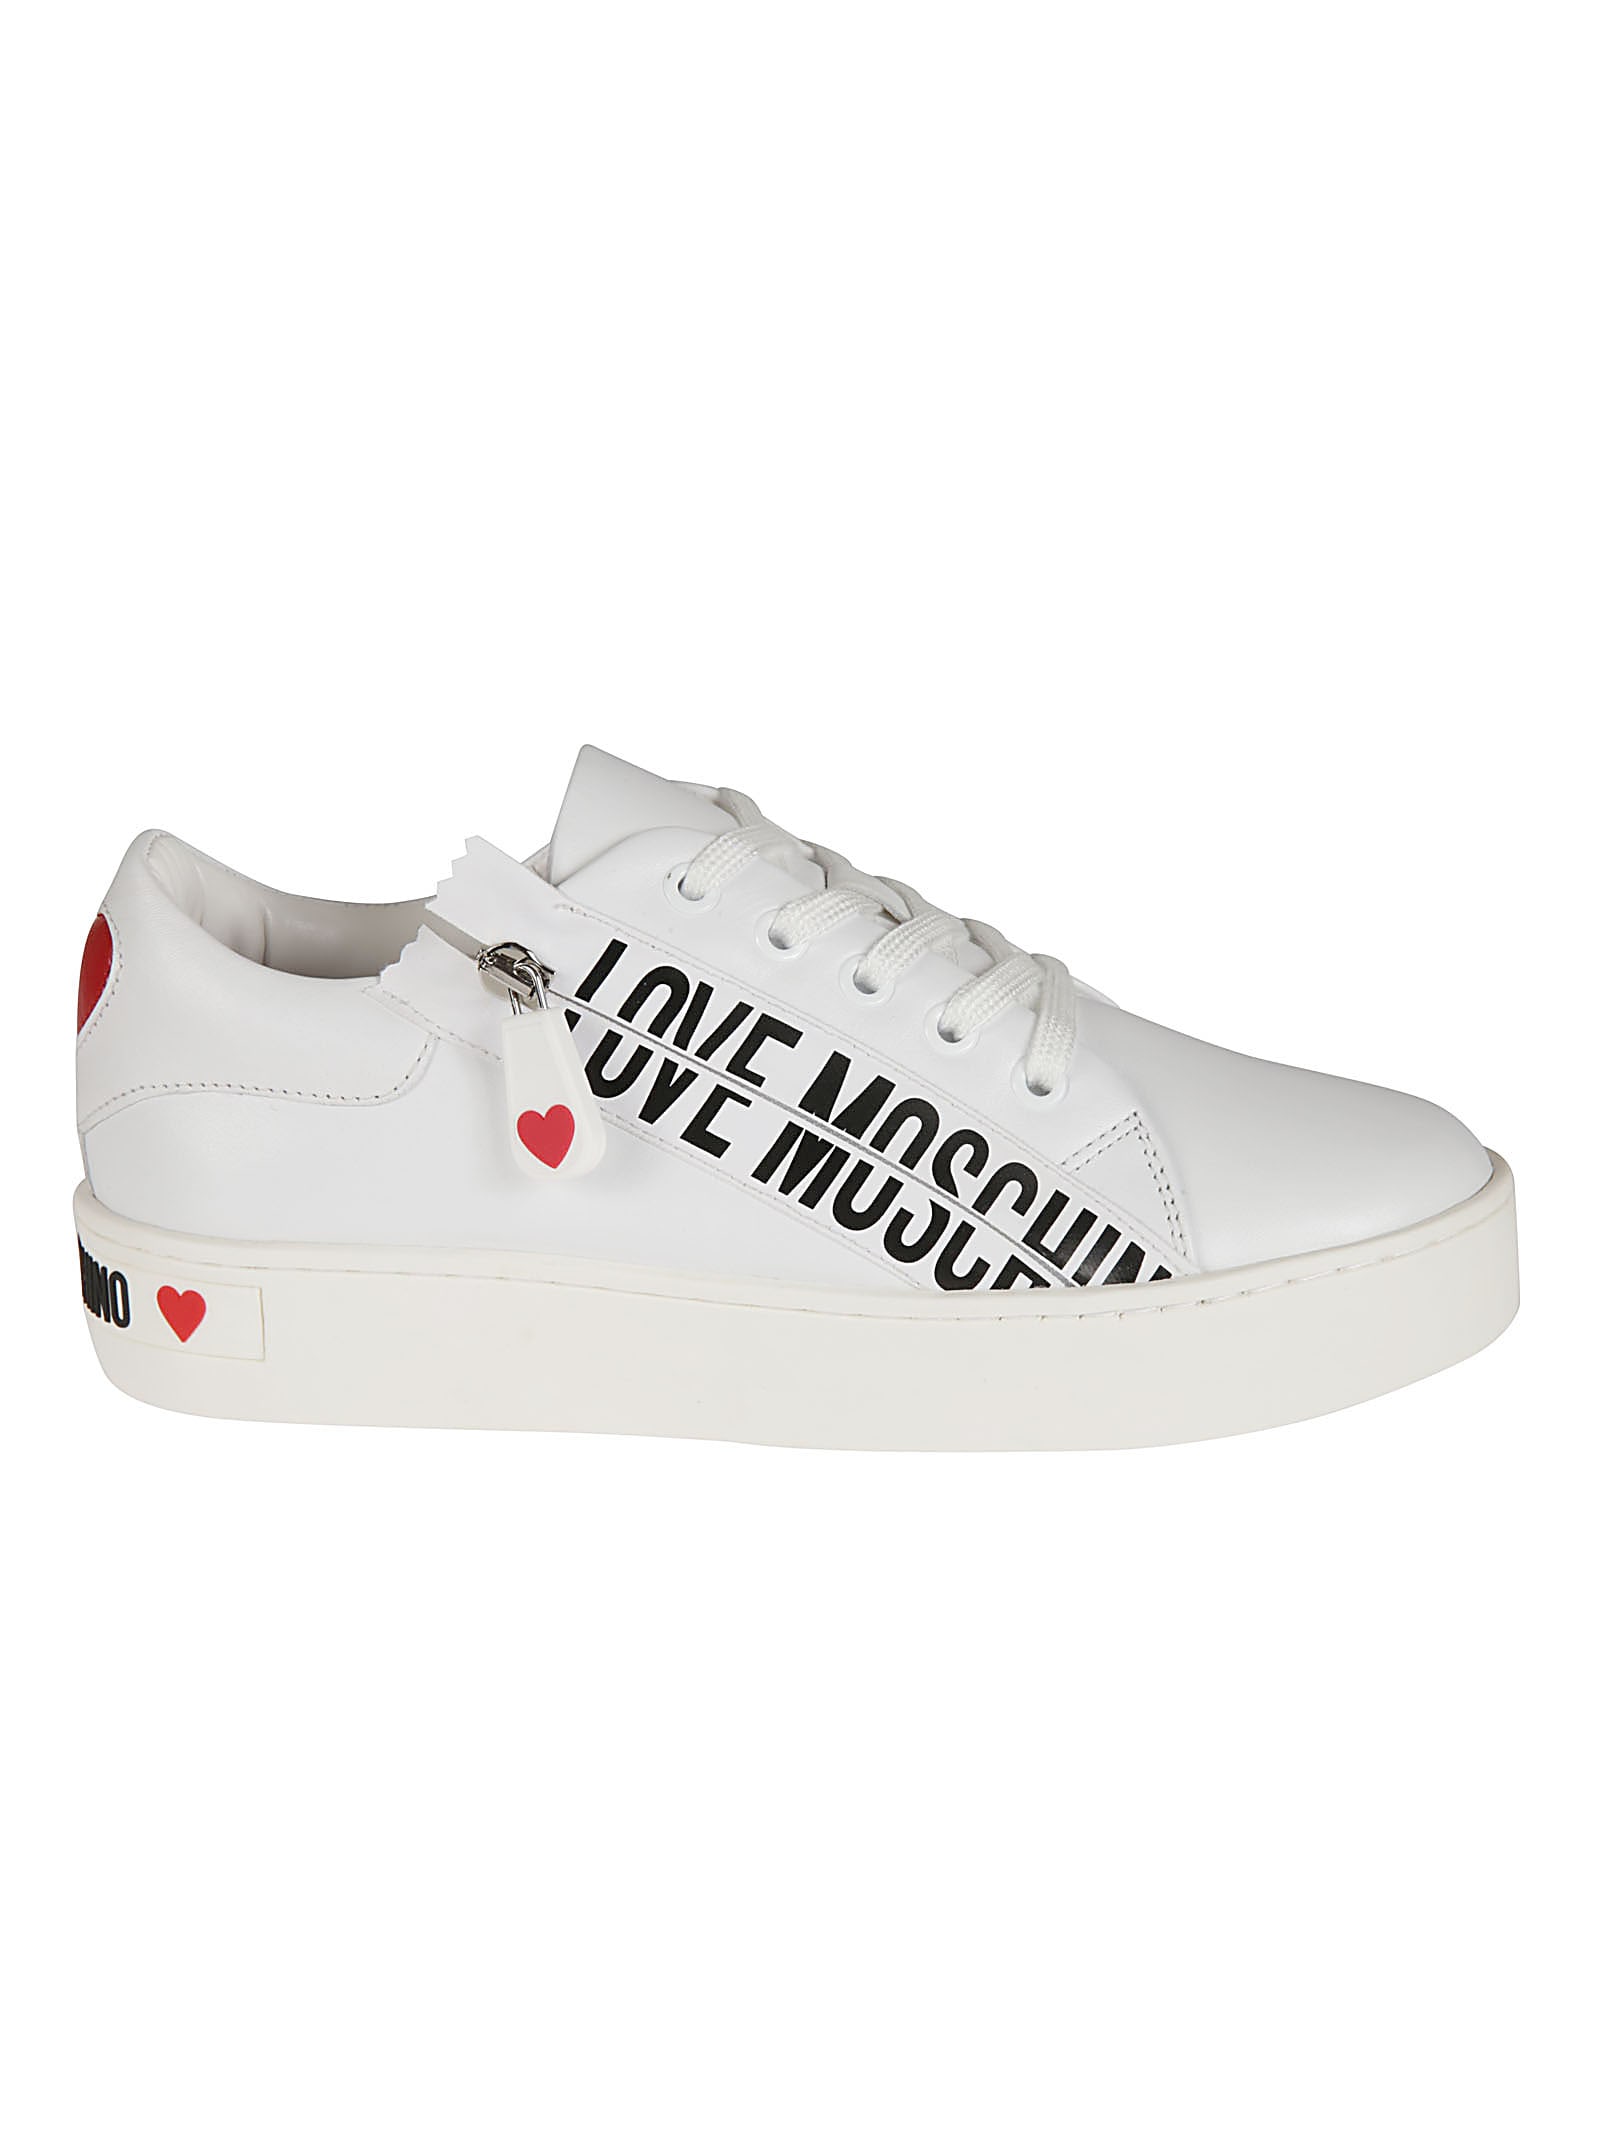 Buy Love Moschino Side Zipped Logo Print Sneakers online, shop Love Moschino shoes with free shipping